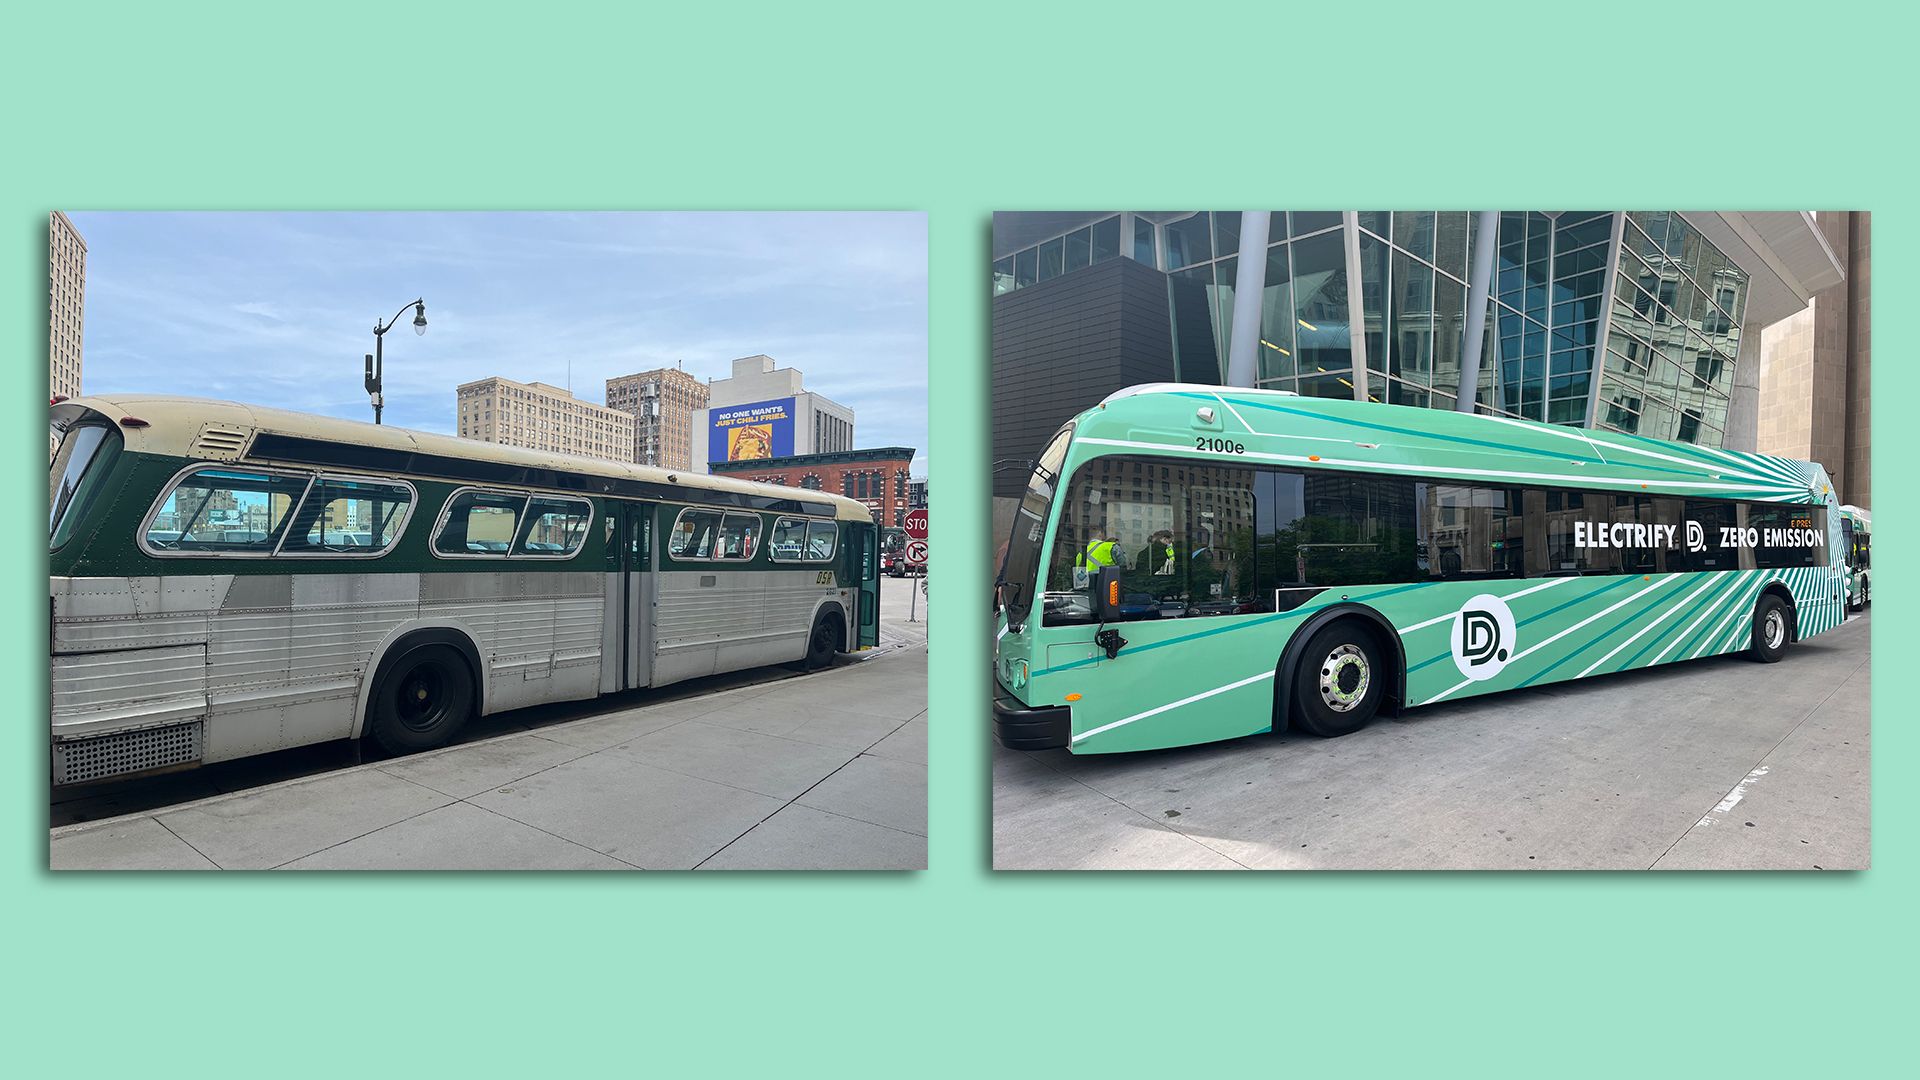 One of Detroit's new electric buses, right, alongside a bus from 1968.